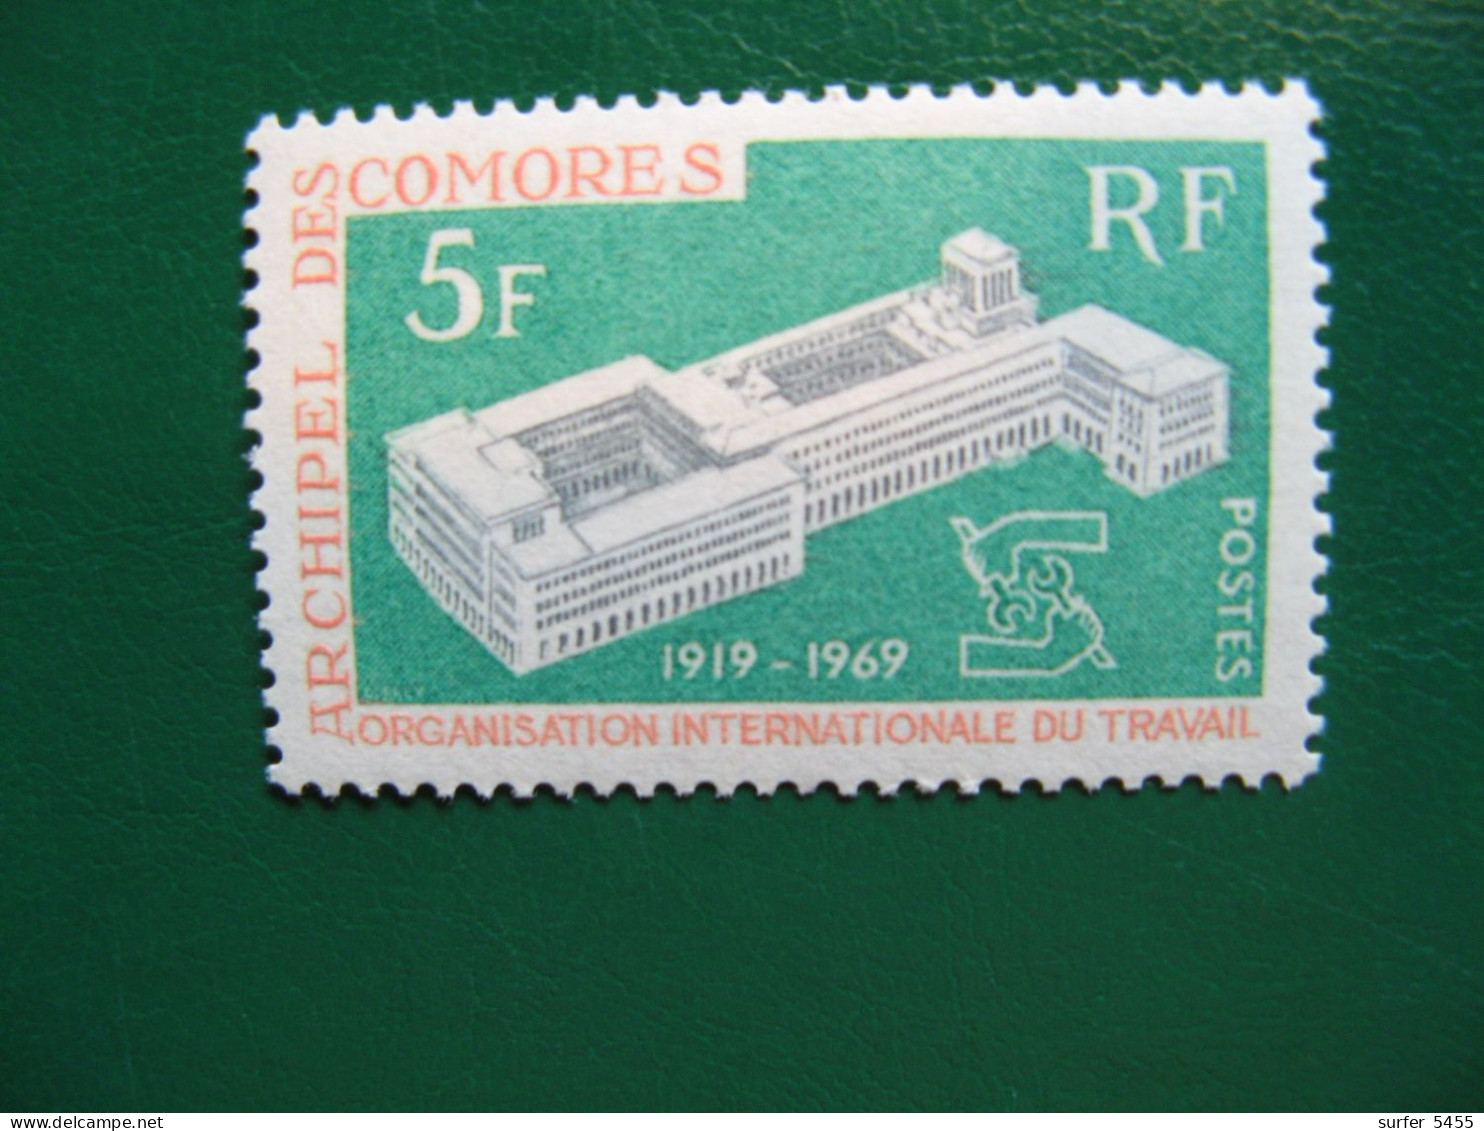 COMORES YVERT POSTE ORDINAIRE N° 55 TIMBRE NEUF** LUXE COTE 2,00 EUROS - Unused Stamps